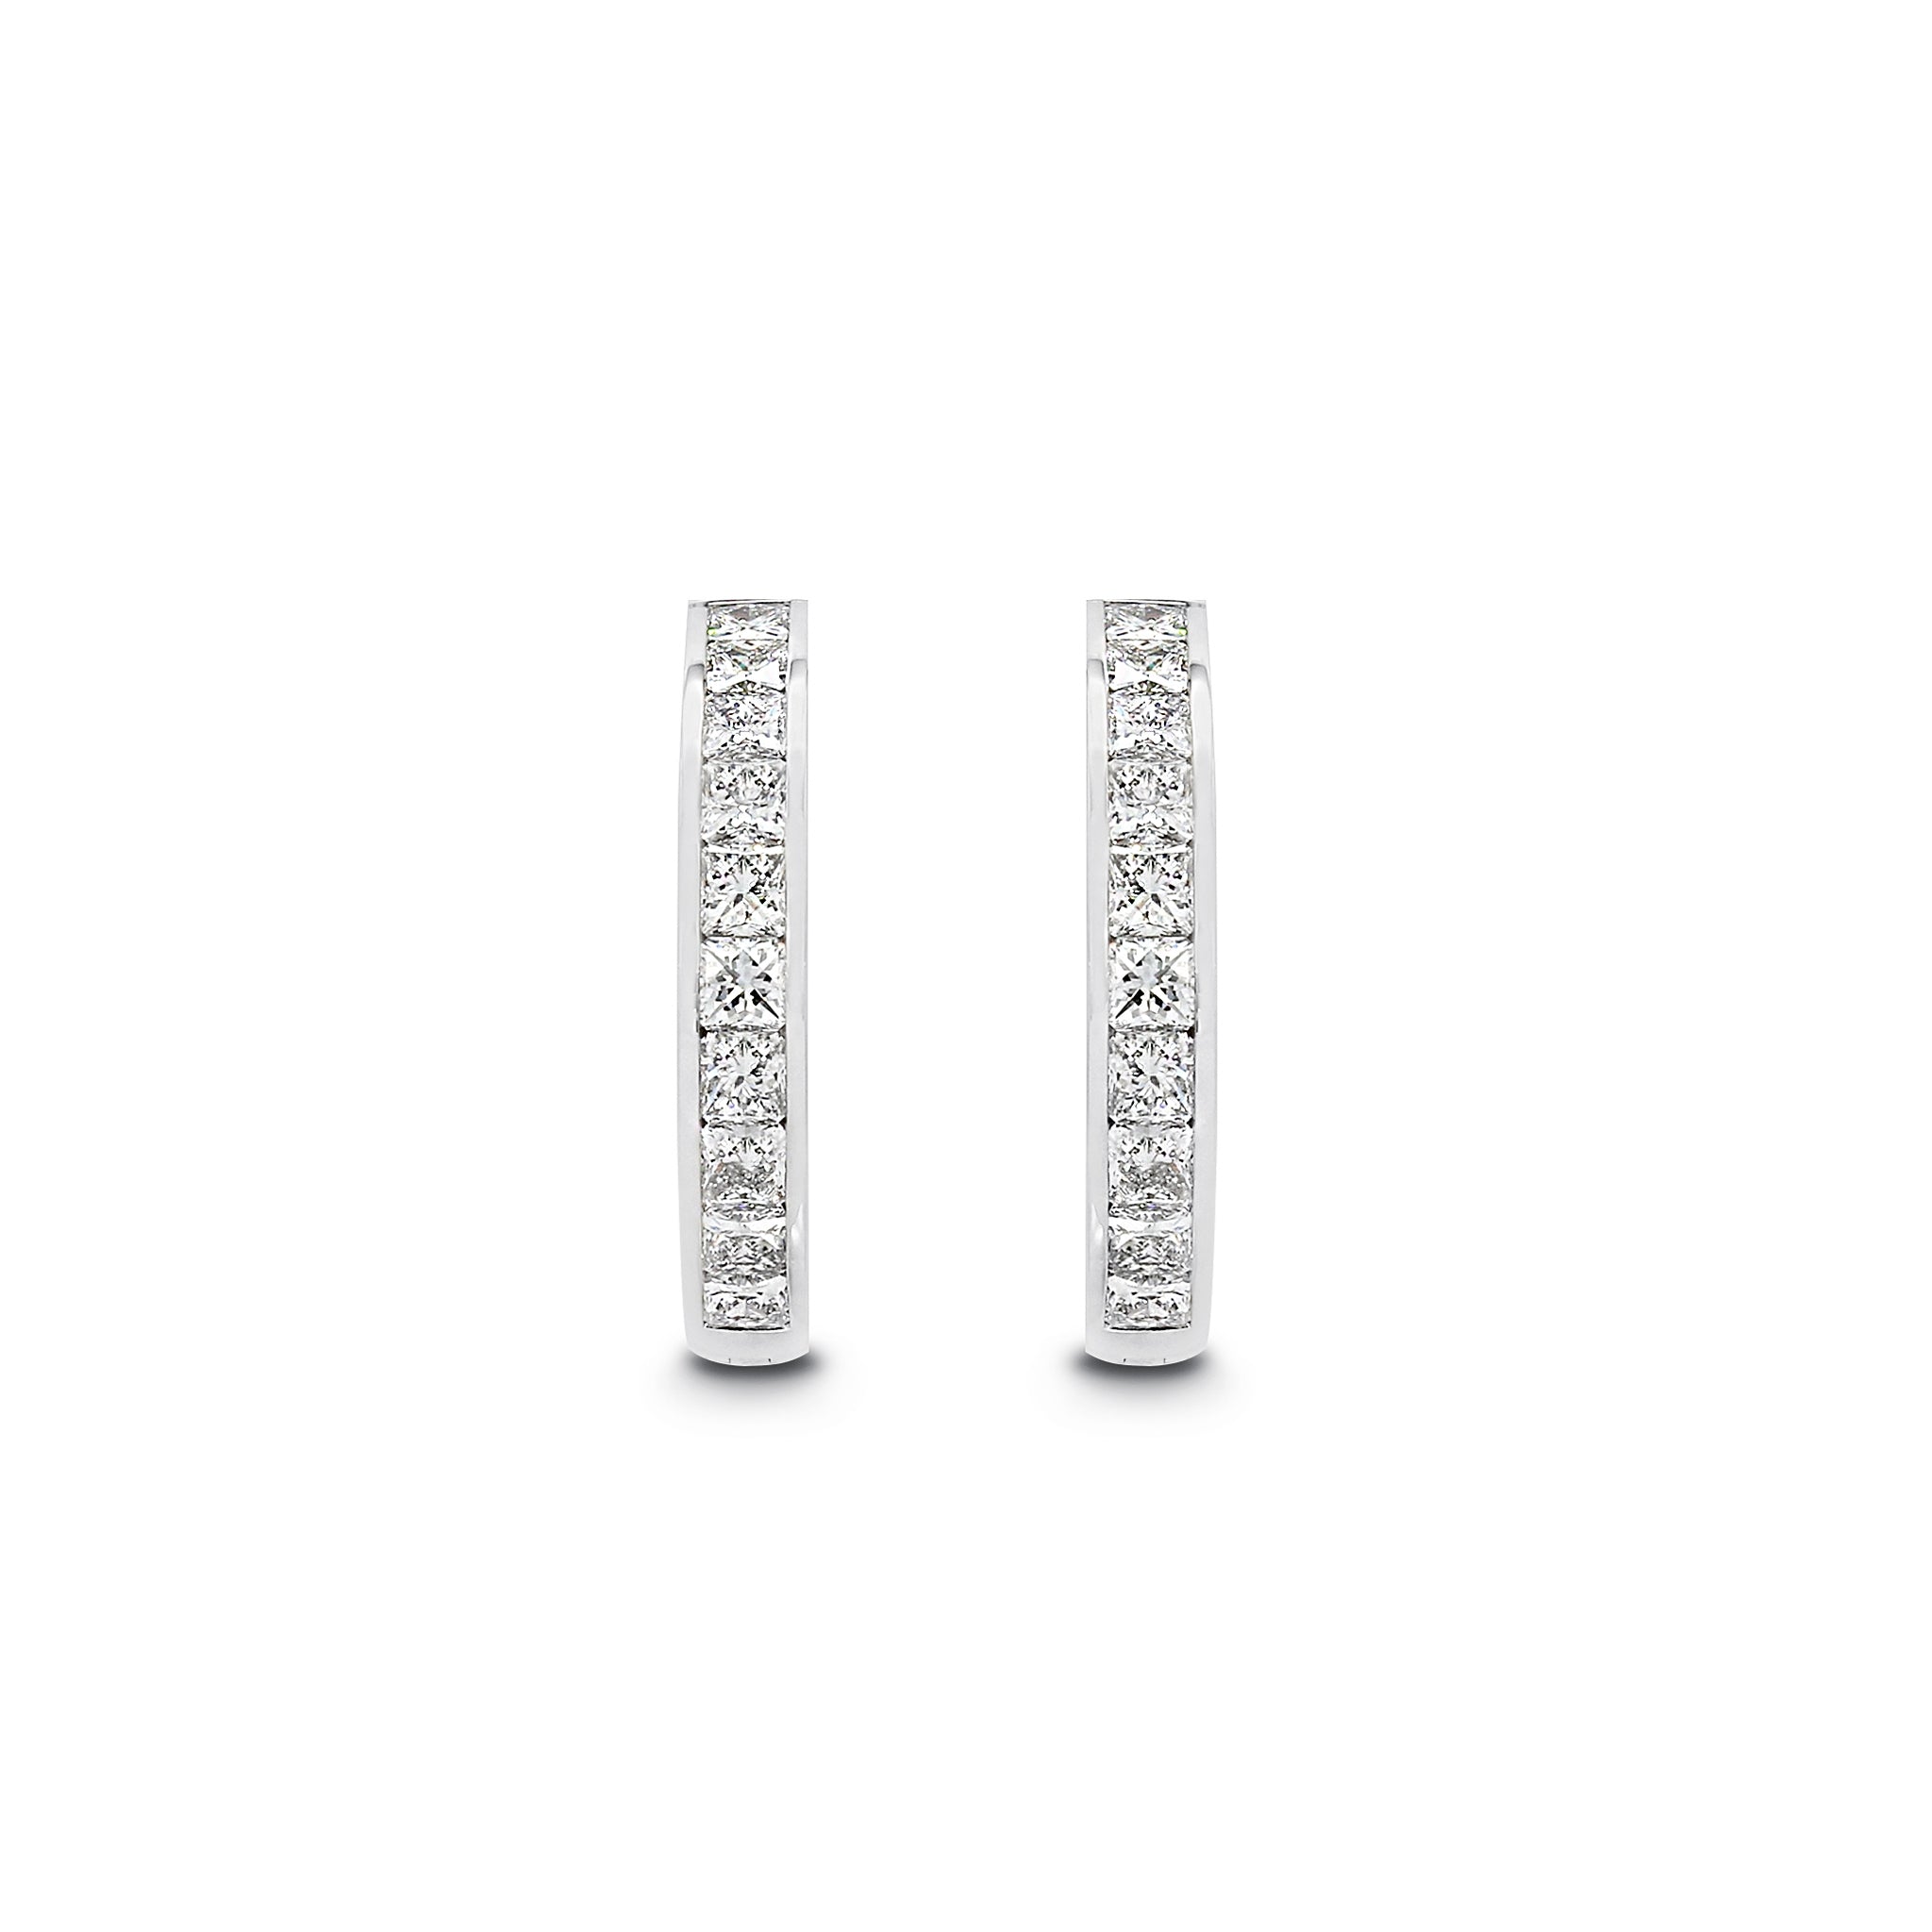 Shimansky - My Girl Channel Set Diamond Huggie Earrings 2.40ct Crafted in 18K White Gold